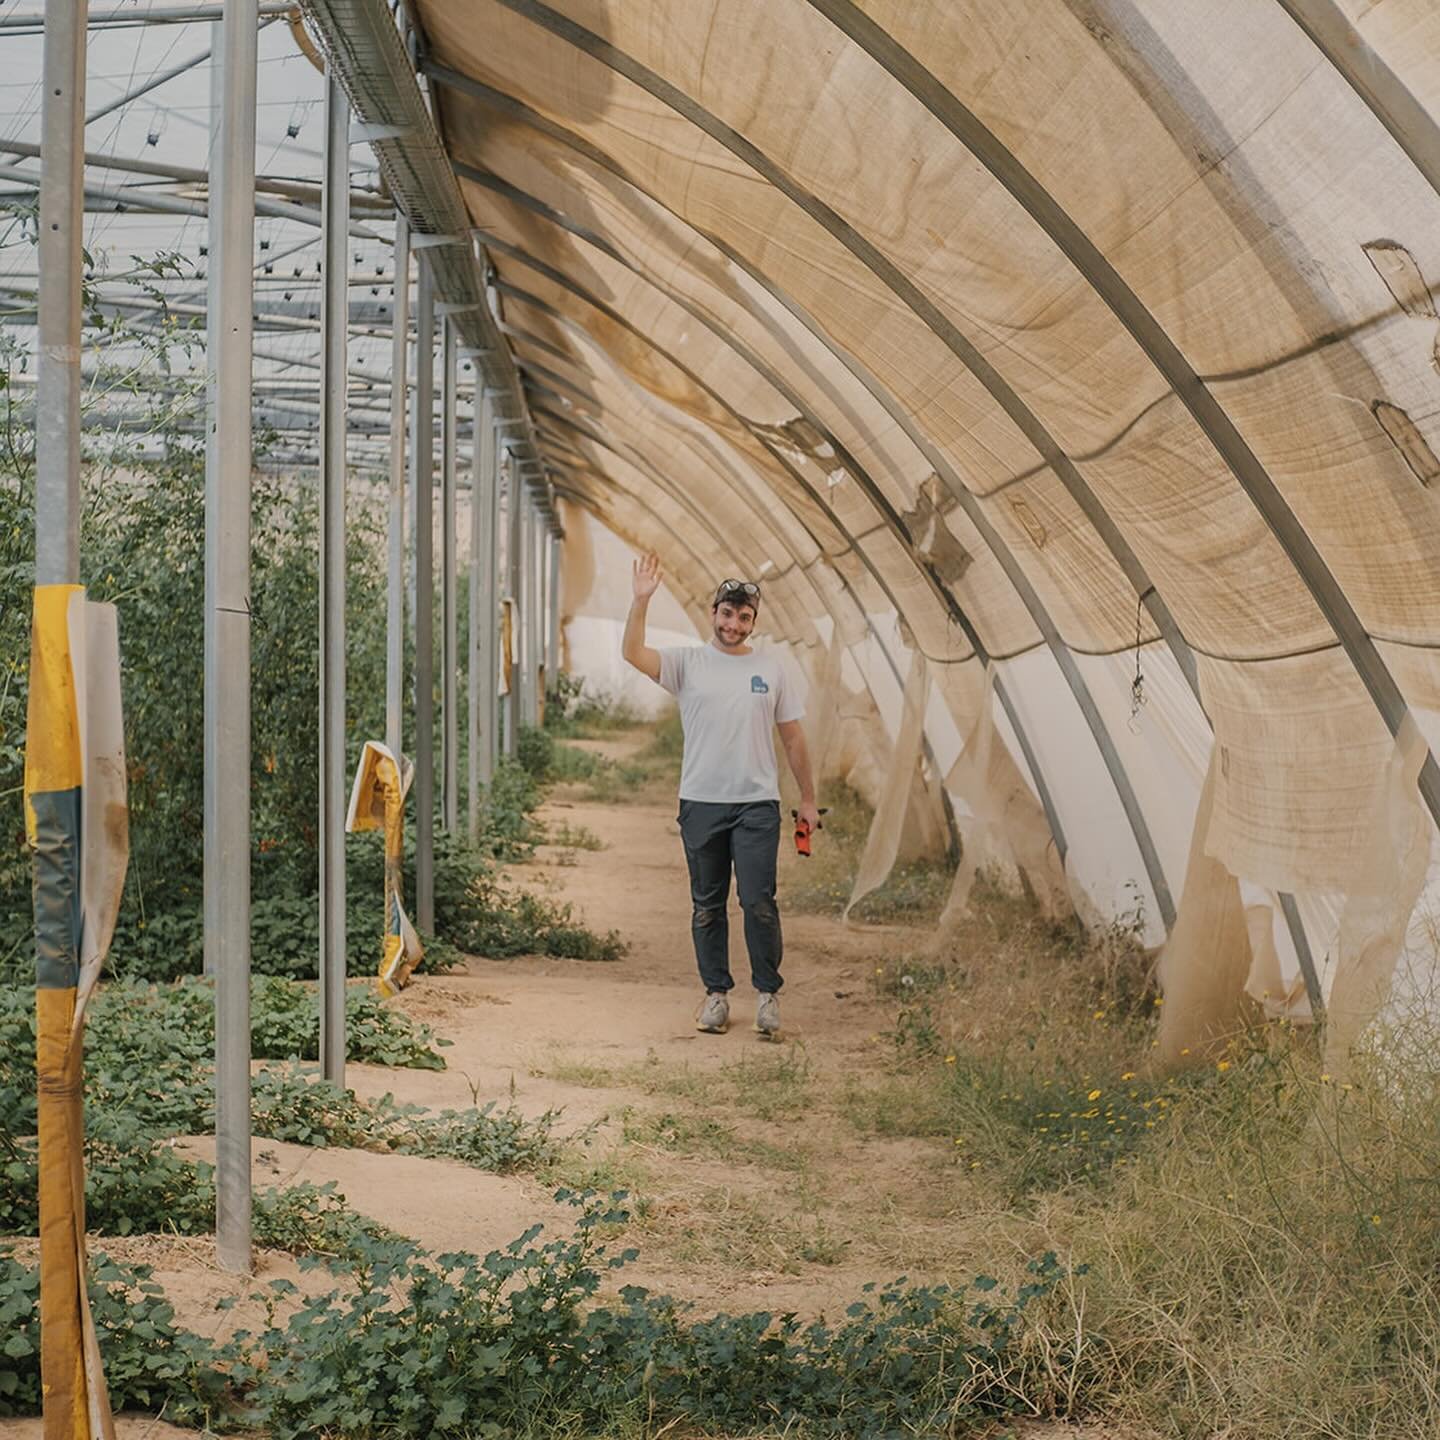 Our responders have been honored to assist in harvesting produce along the Egypt-Israel border. With the ongoing war causing a shortage of laborers on many farms, and considering Israel&rsquo;s significant role in producing the majority of their agri